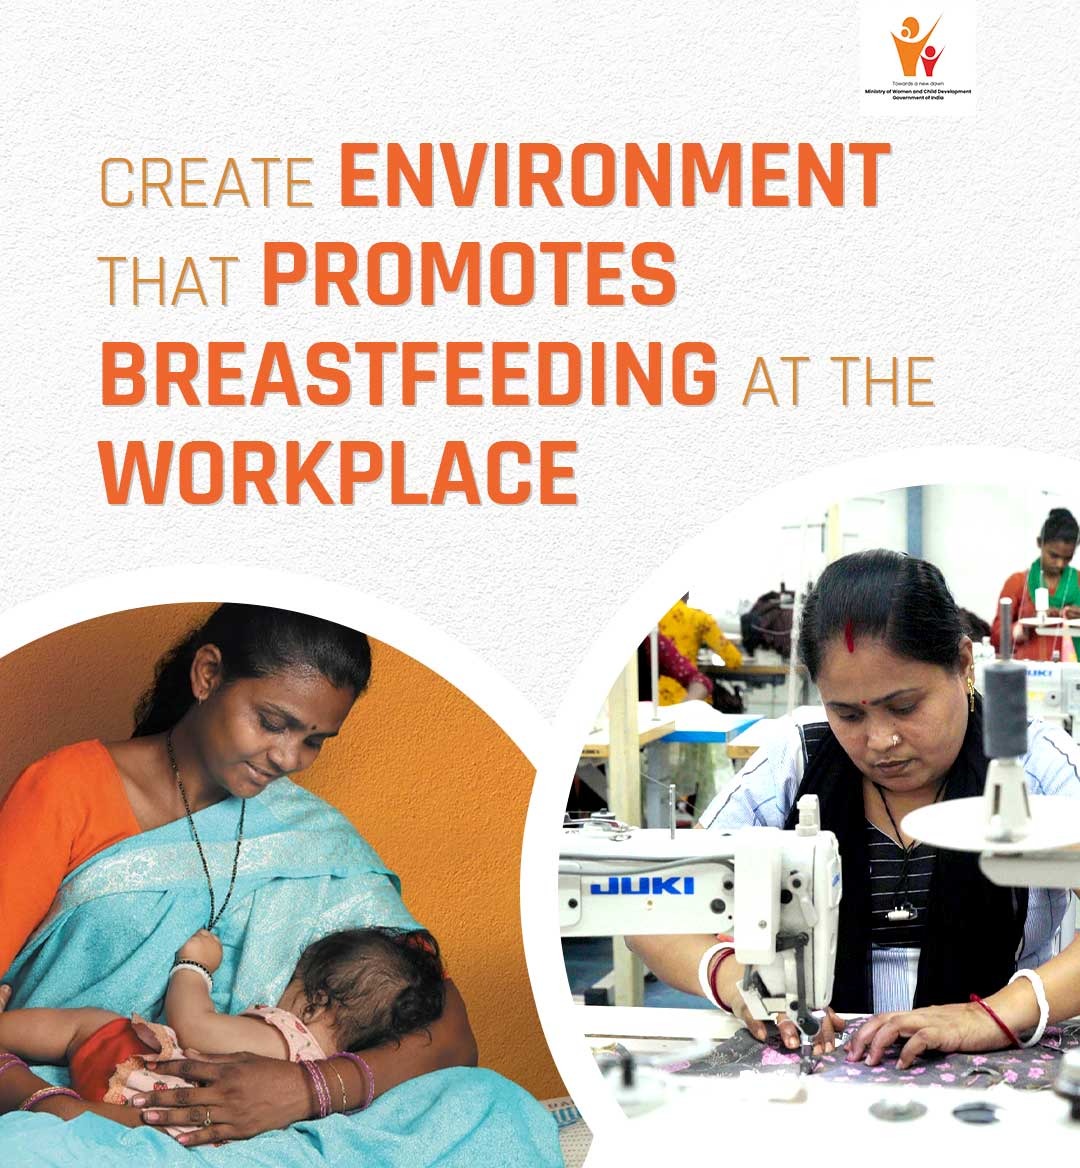 Building a supportive work environment!

Empowering mothers with #breastfeeding awareness & urging employers to provide dedicated feeding corners. Together, we can ensure a healthy start.
.
.
#sahiposhandeshroshan #missionposhan2.0
@pibwcd